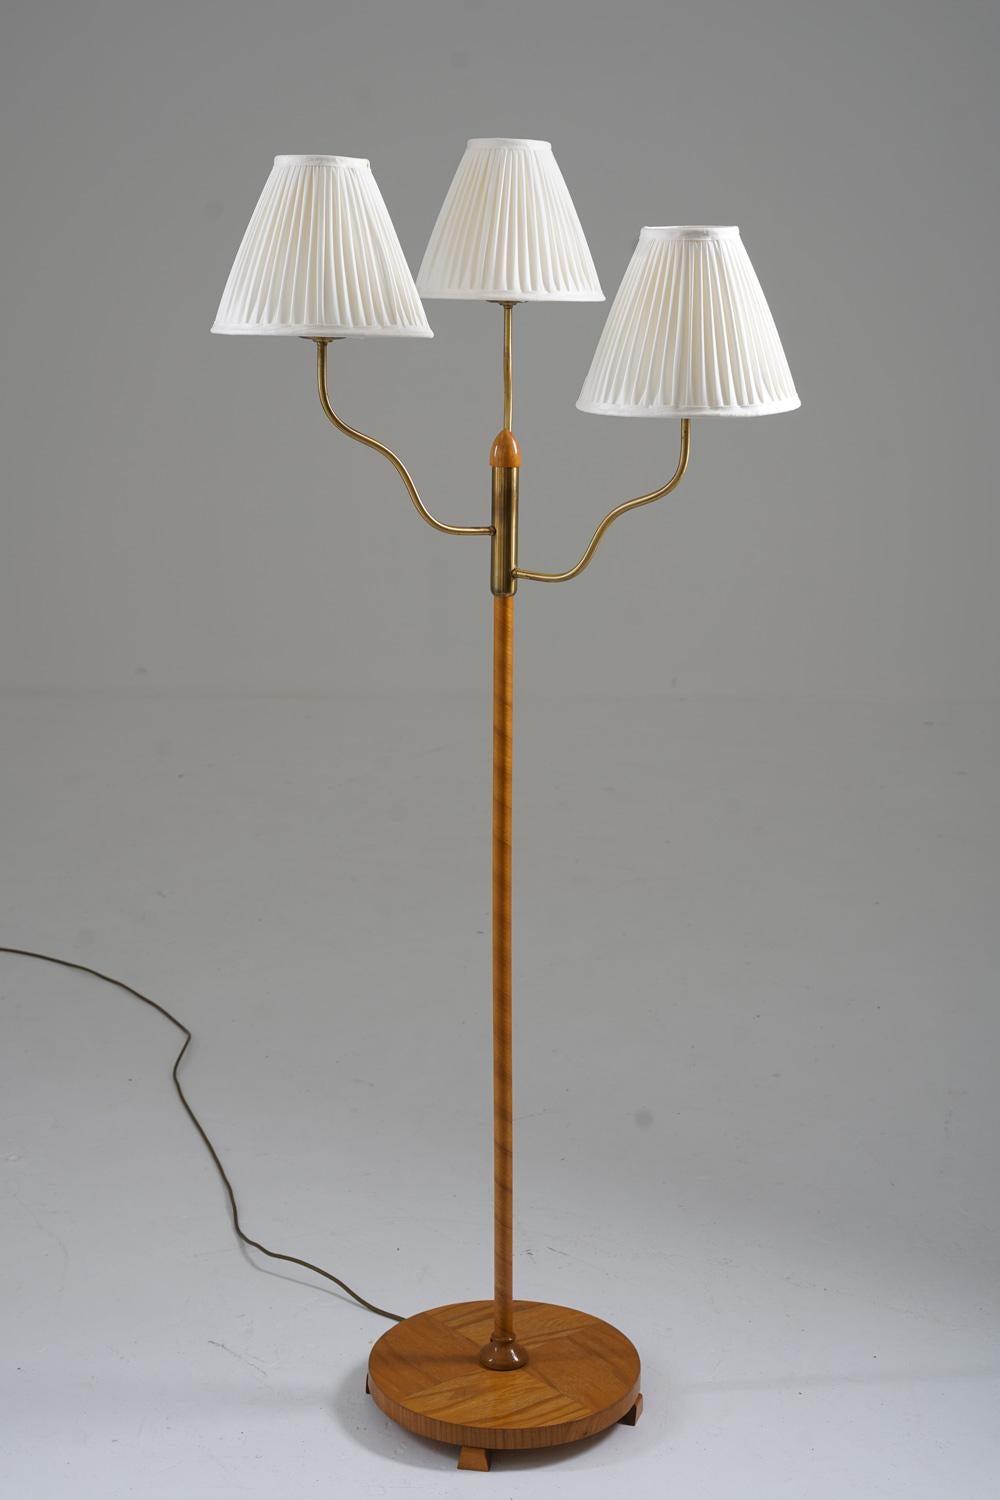 Rare floor lamp manufactured in Sweden, 1930-1940s. 
This floor lamp consists of a wooden base and a rod webbed in elm-veneer. Three brass rods holds the light sources, hidden by fabric shades.

Condition: Good vintage condition with new